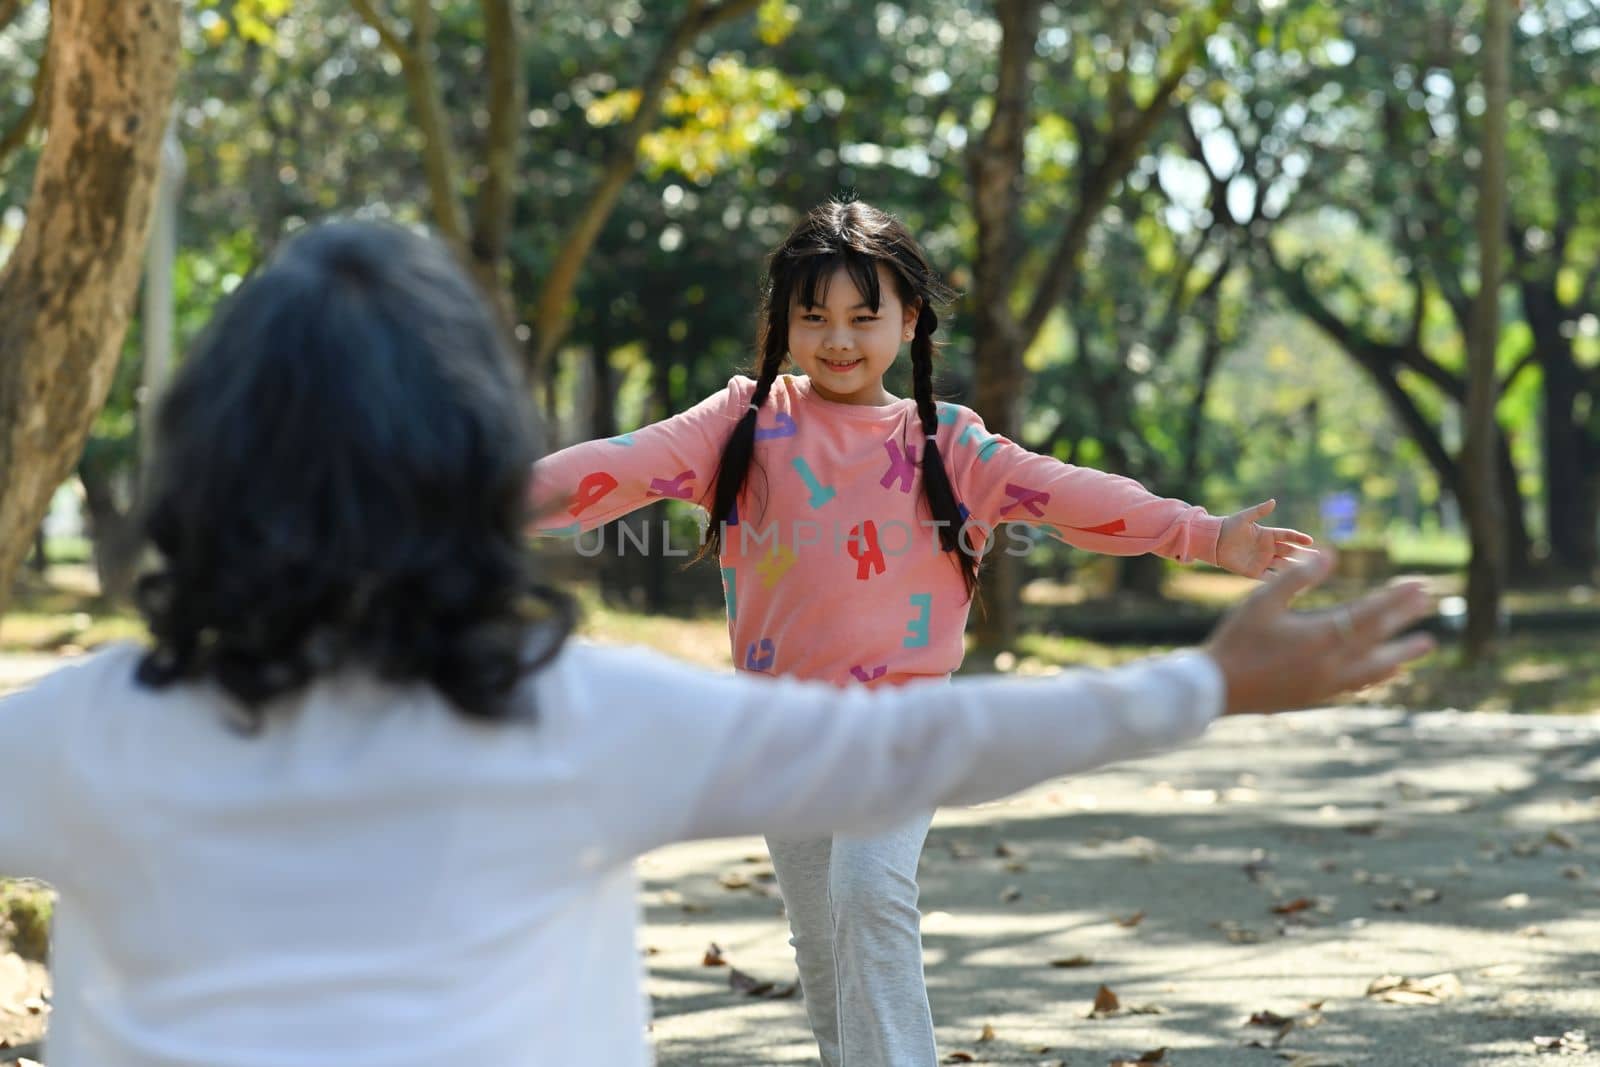 Affectionate little girl running to hug grandmother with arms open. Happy moment, family and love concept.